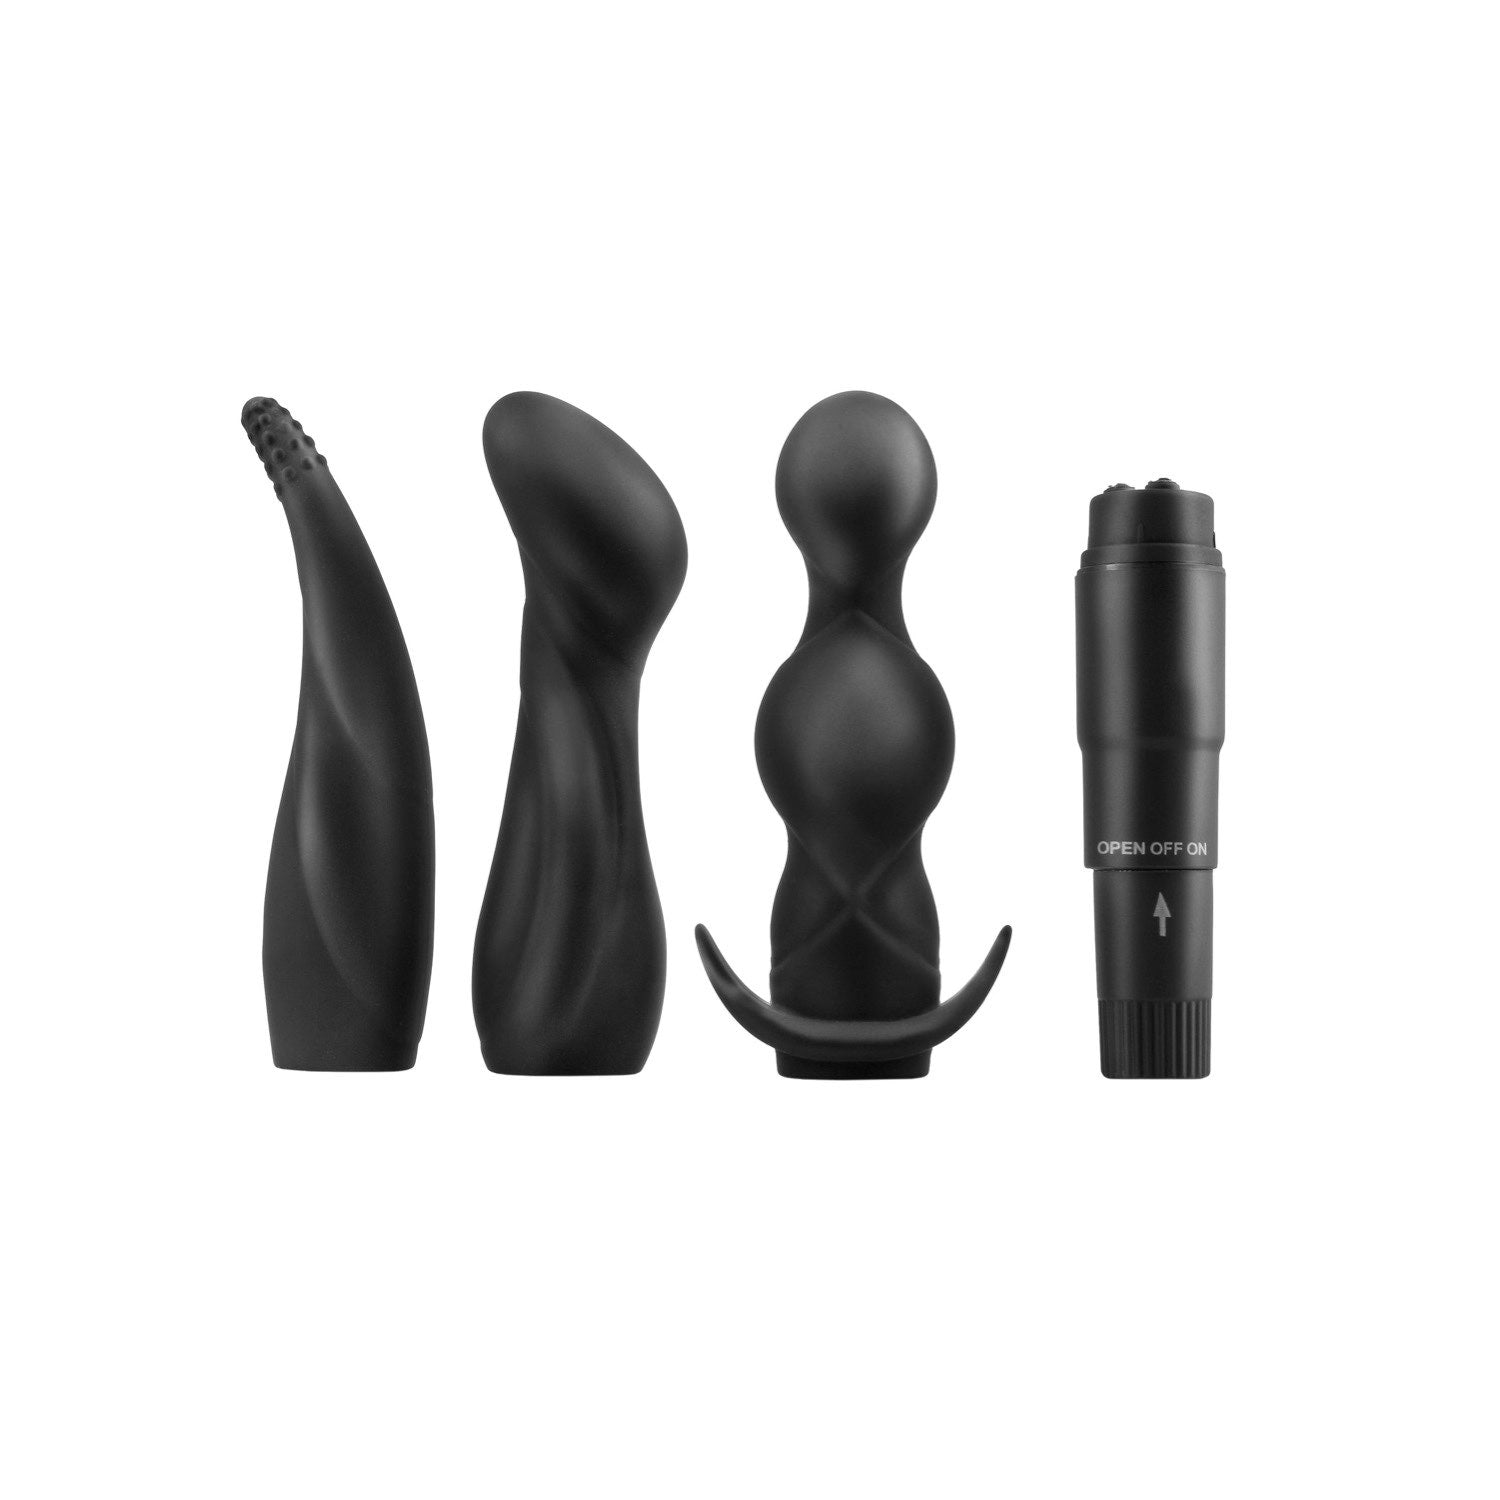 Anal Fantasy Collection Anal Adventure Kit - Black Vibrator with 3 Anal Sleeves by Pipedream